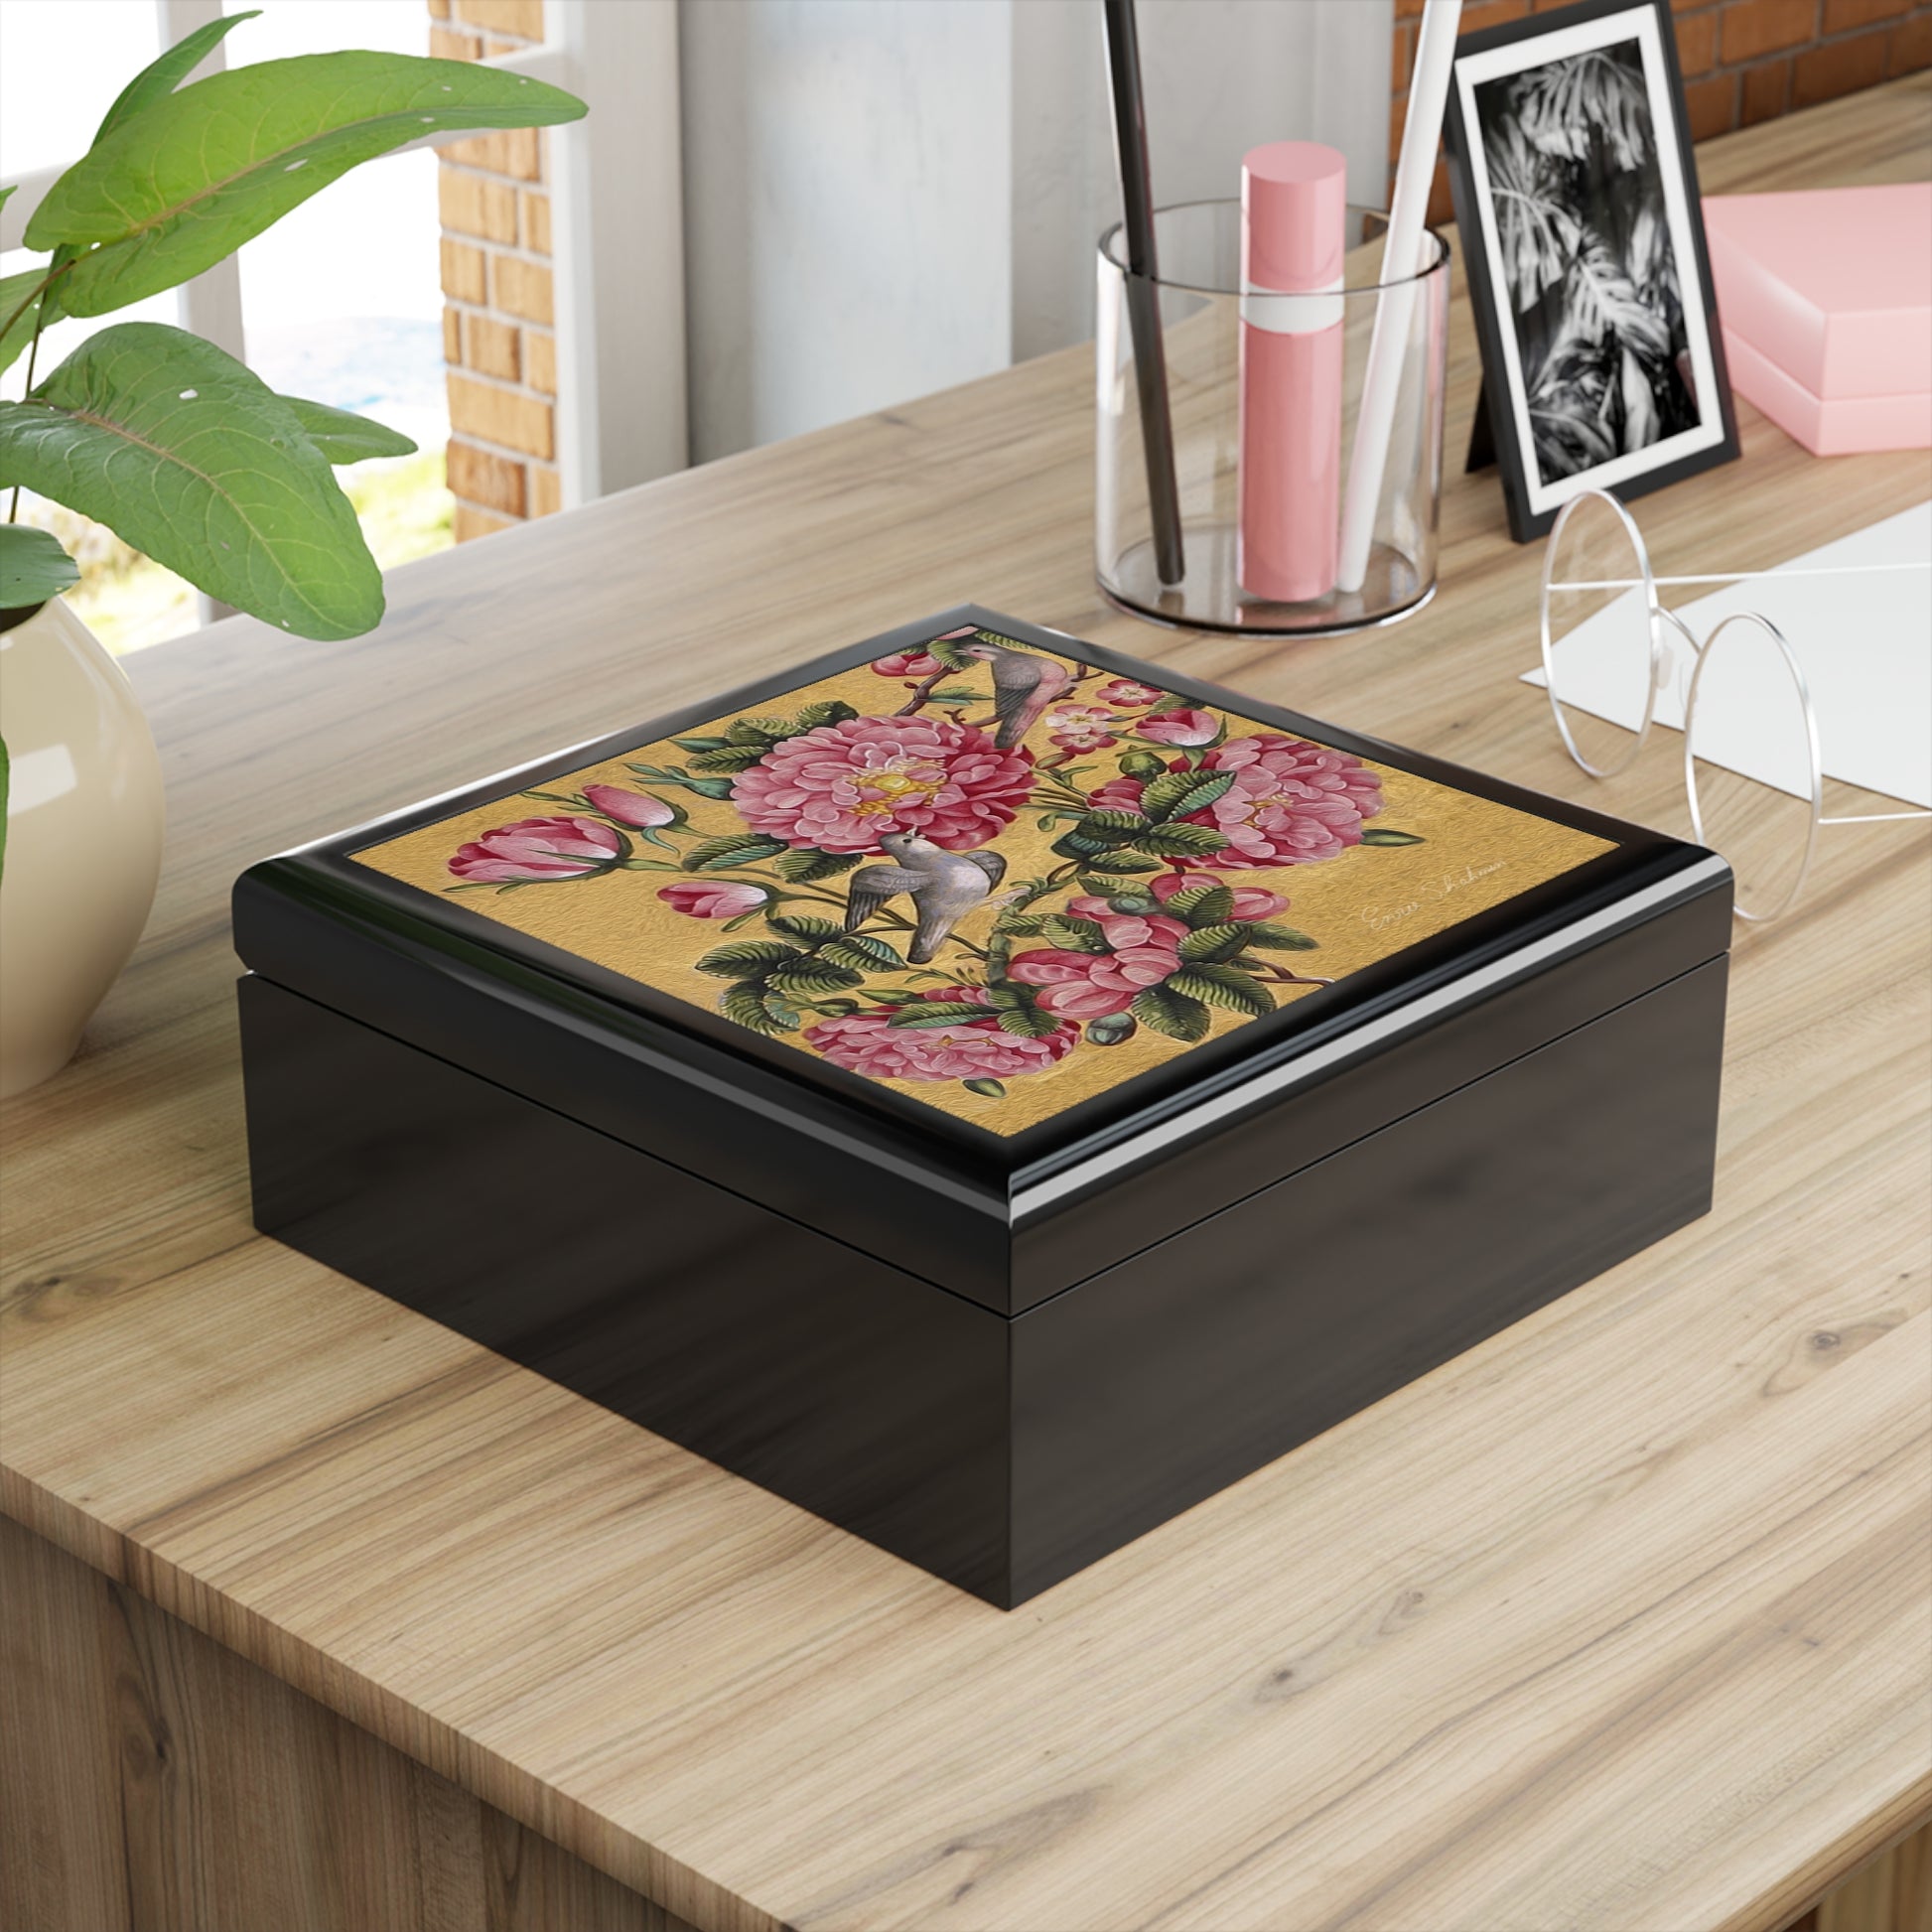 Lacquered Jewelry Keepsake Box - Floral Design black